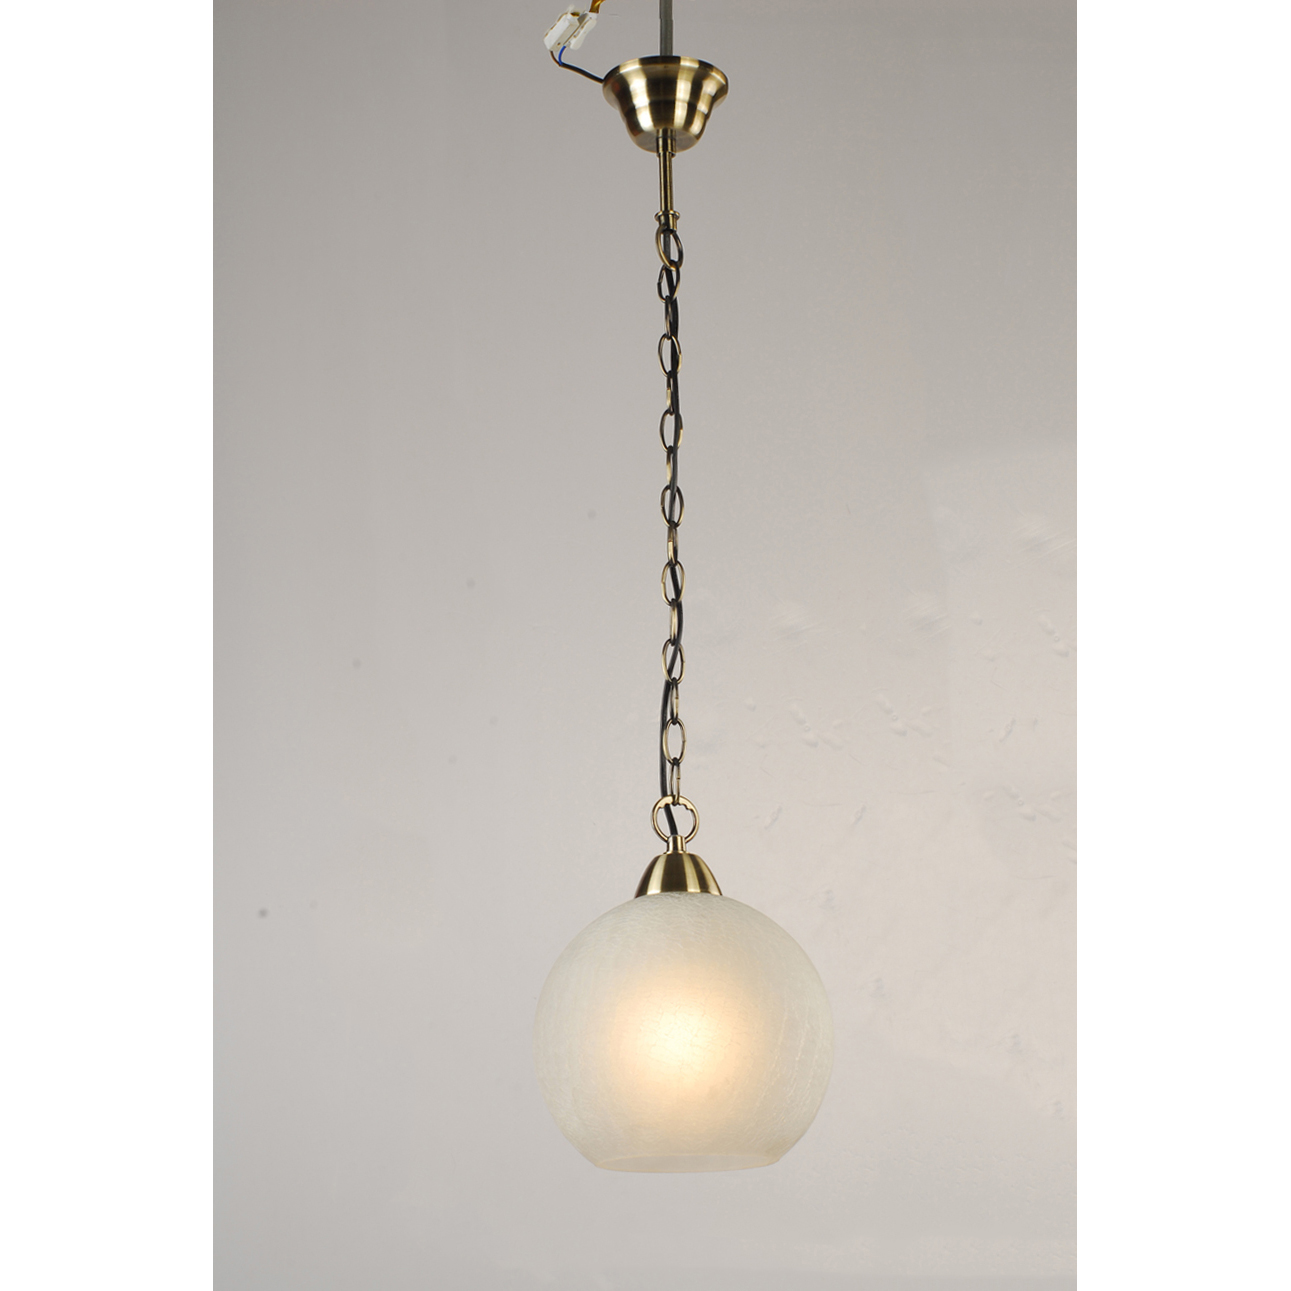 Home Decor 1 3 5 heads E27 Dining Room Bedroom Bronze Chain Hanging White Glass Ball Chandelier